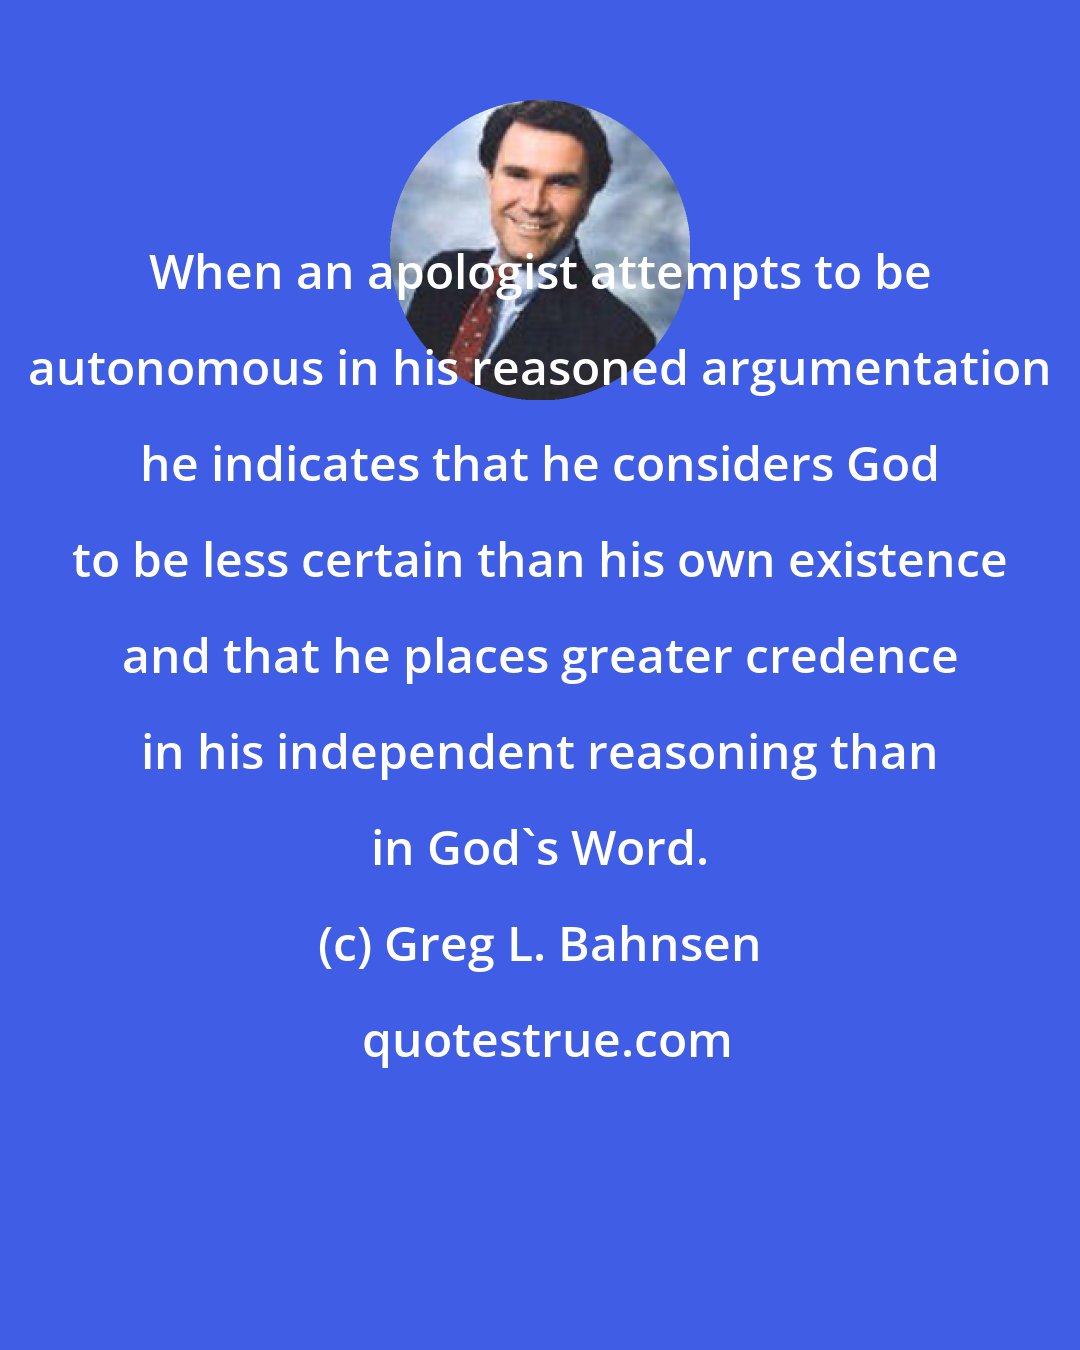 Greg L. Bahnsen: When an apologist attempts to be autonomous in his reasoned argumentation he indicates that he considers God to be less certain than his own existence and that he places greater credence in his independent reasoning than in God's Word.